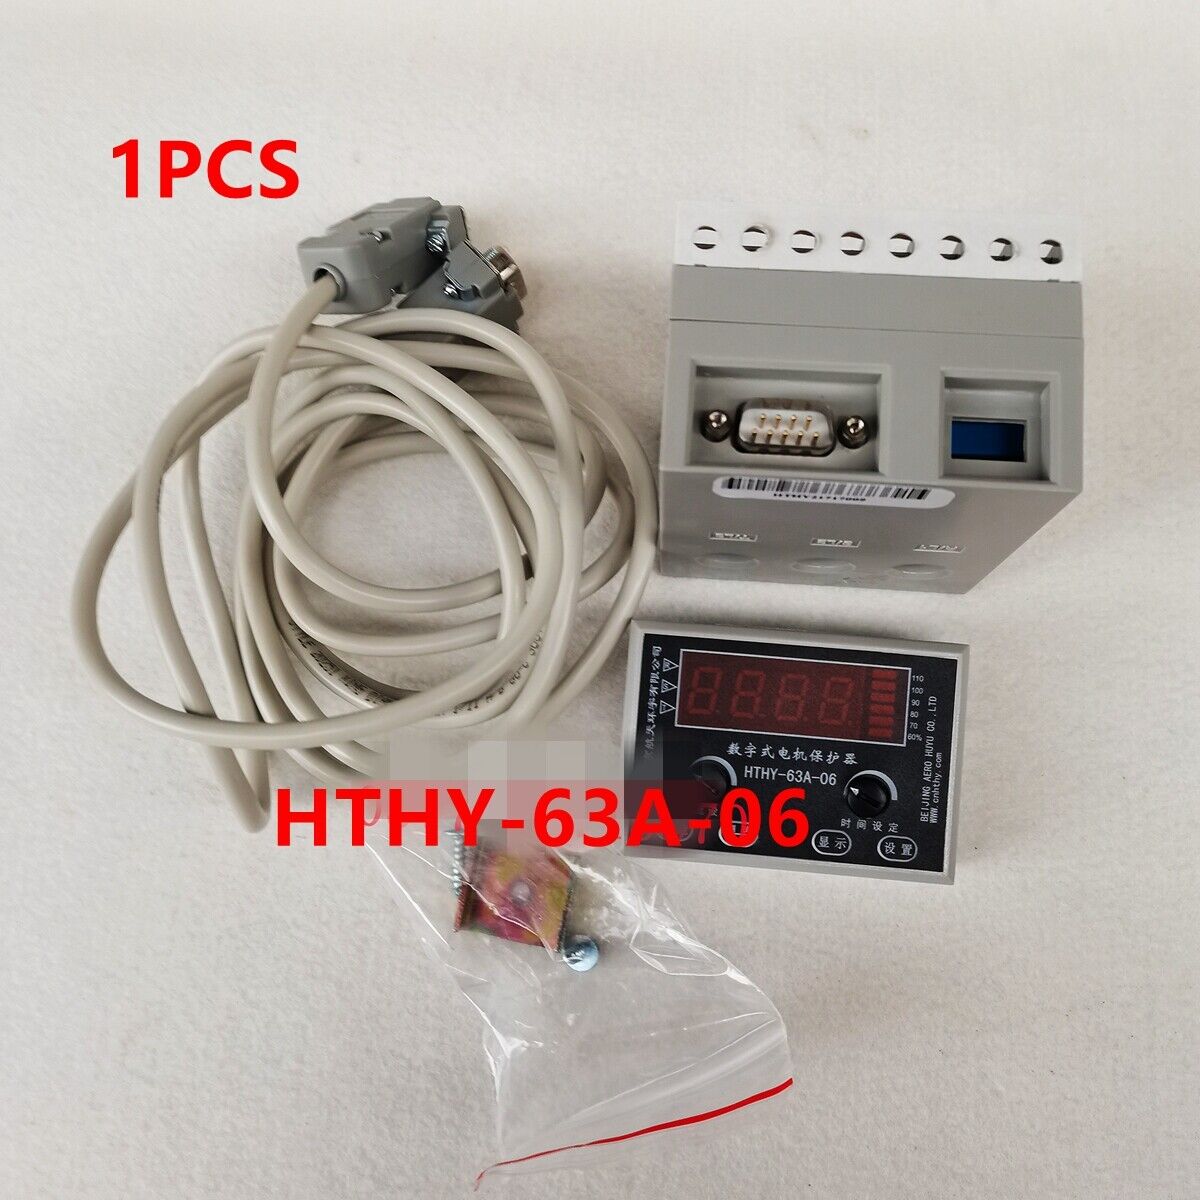 HTHY-63A-06 Digital Motor Protector 0.5A-6A-60A AC220V Motor Monitoring Device